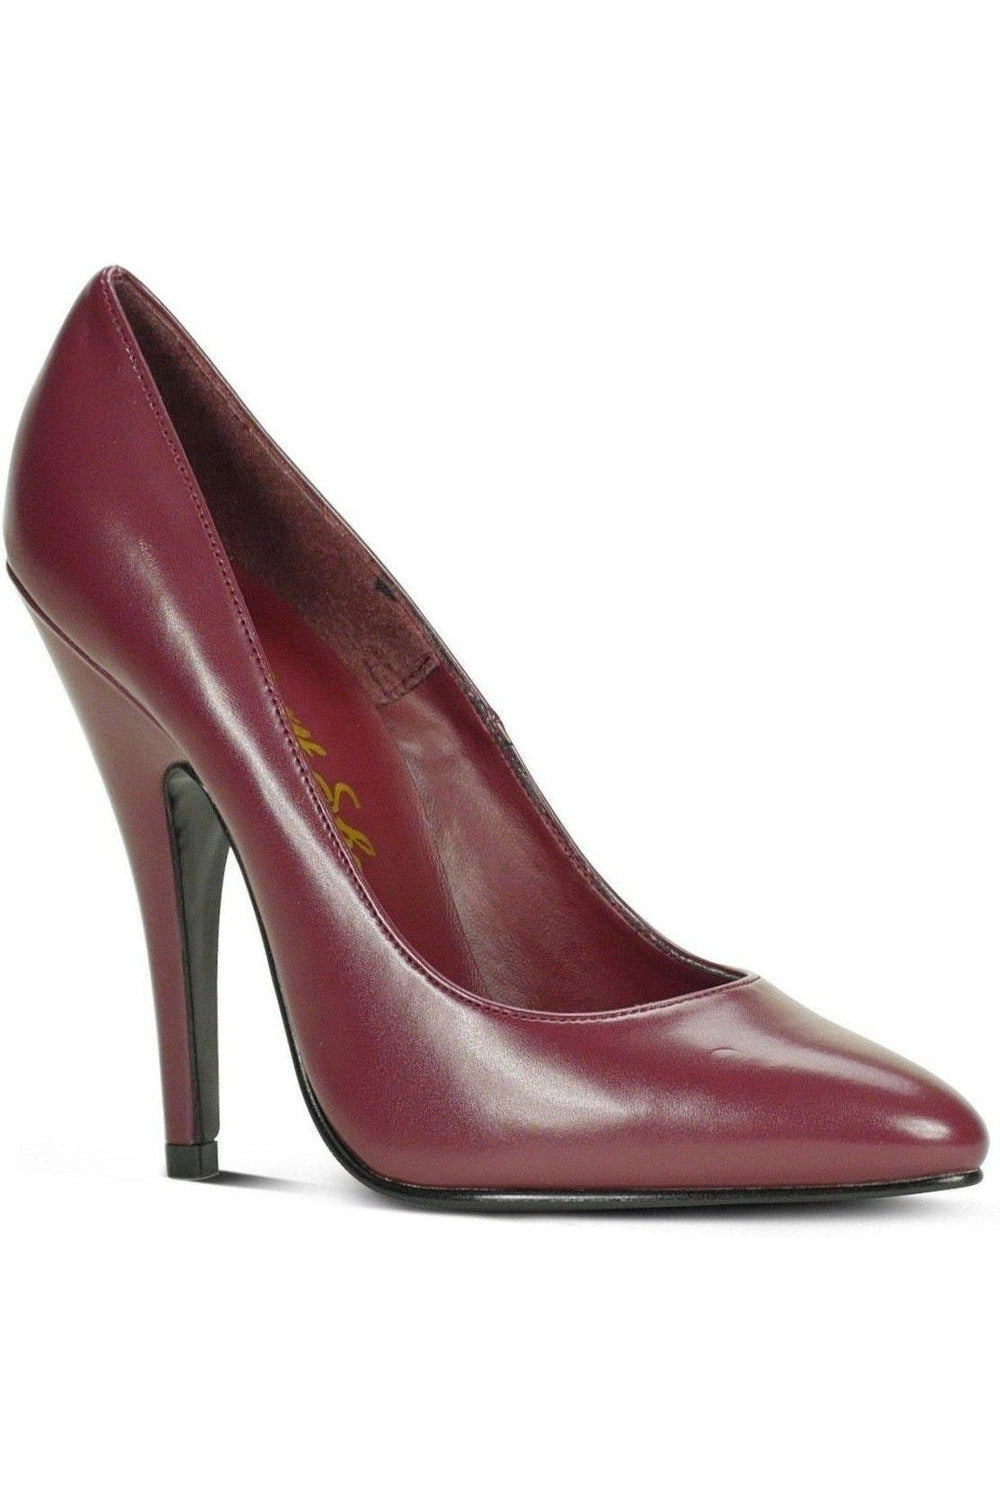 Sexy-4211 Vintage High Heel Pump | Wine Faux Leather-Sexyshoes Brand-Burgundy-Pumps-SEXYSHOES.COM